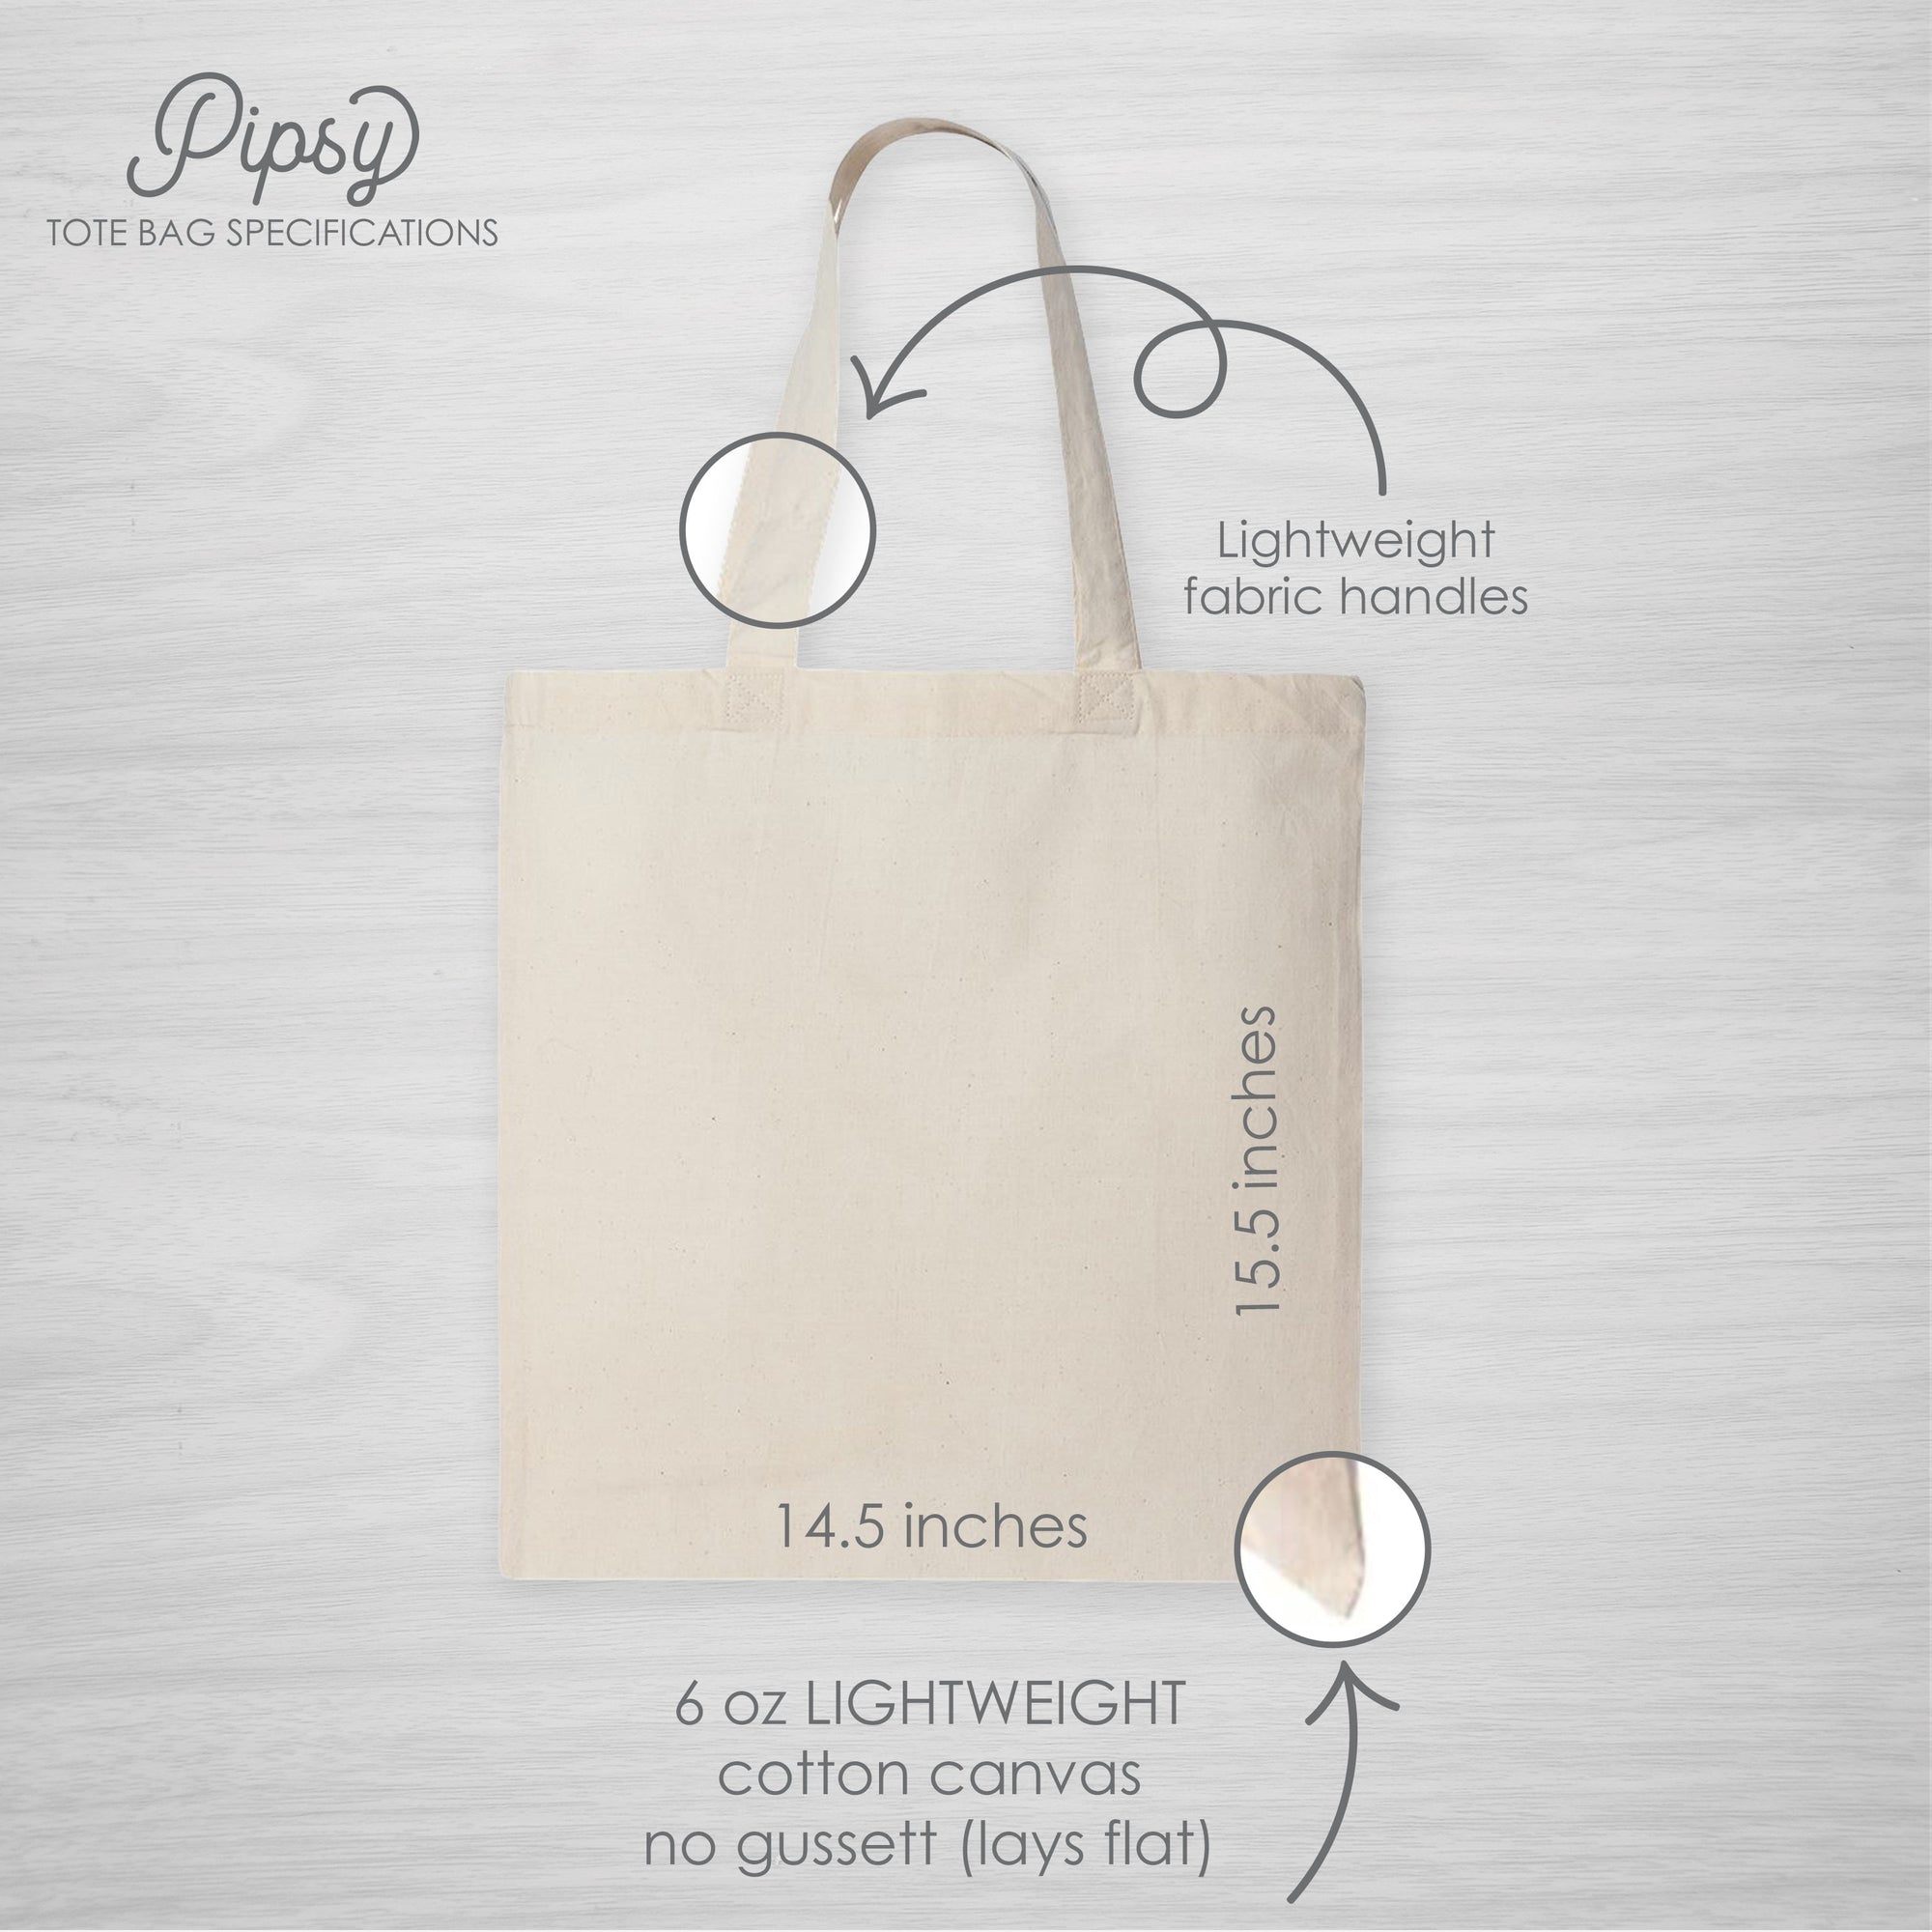 Pipsy Tote Bag Size and Specifications